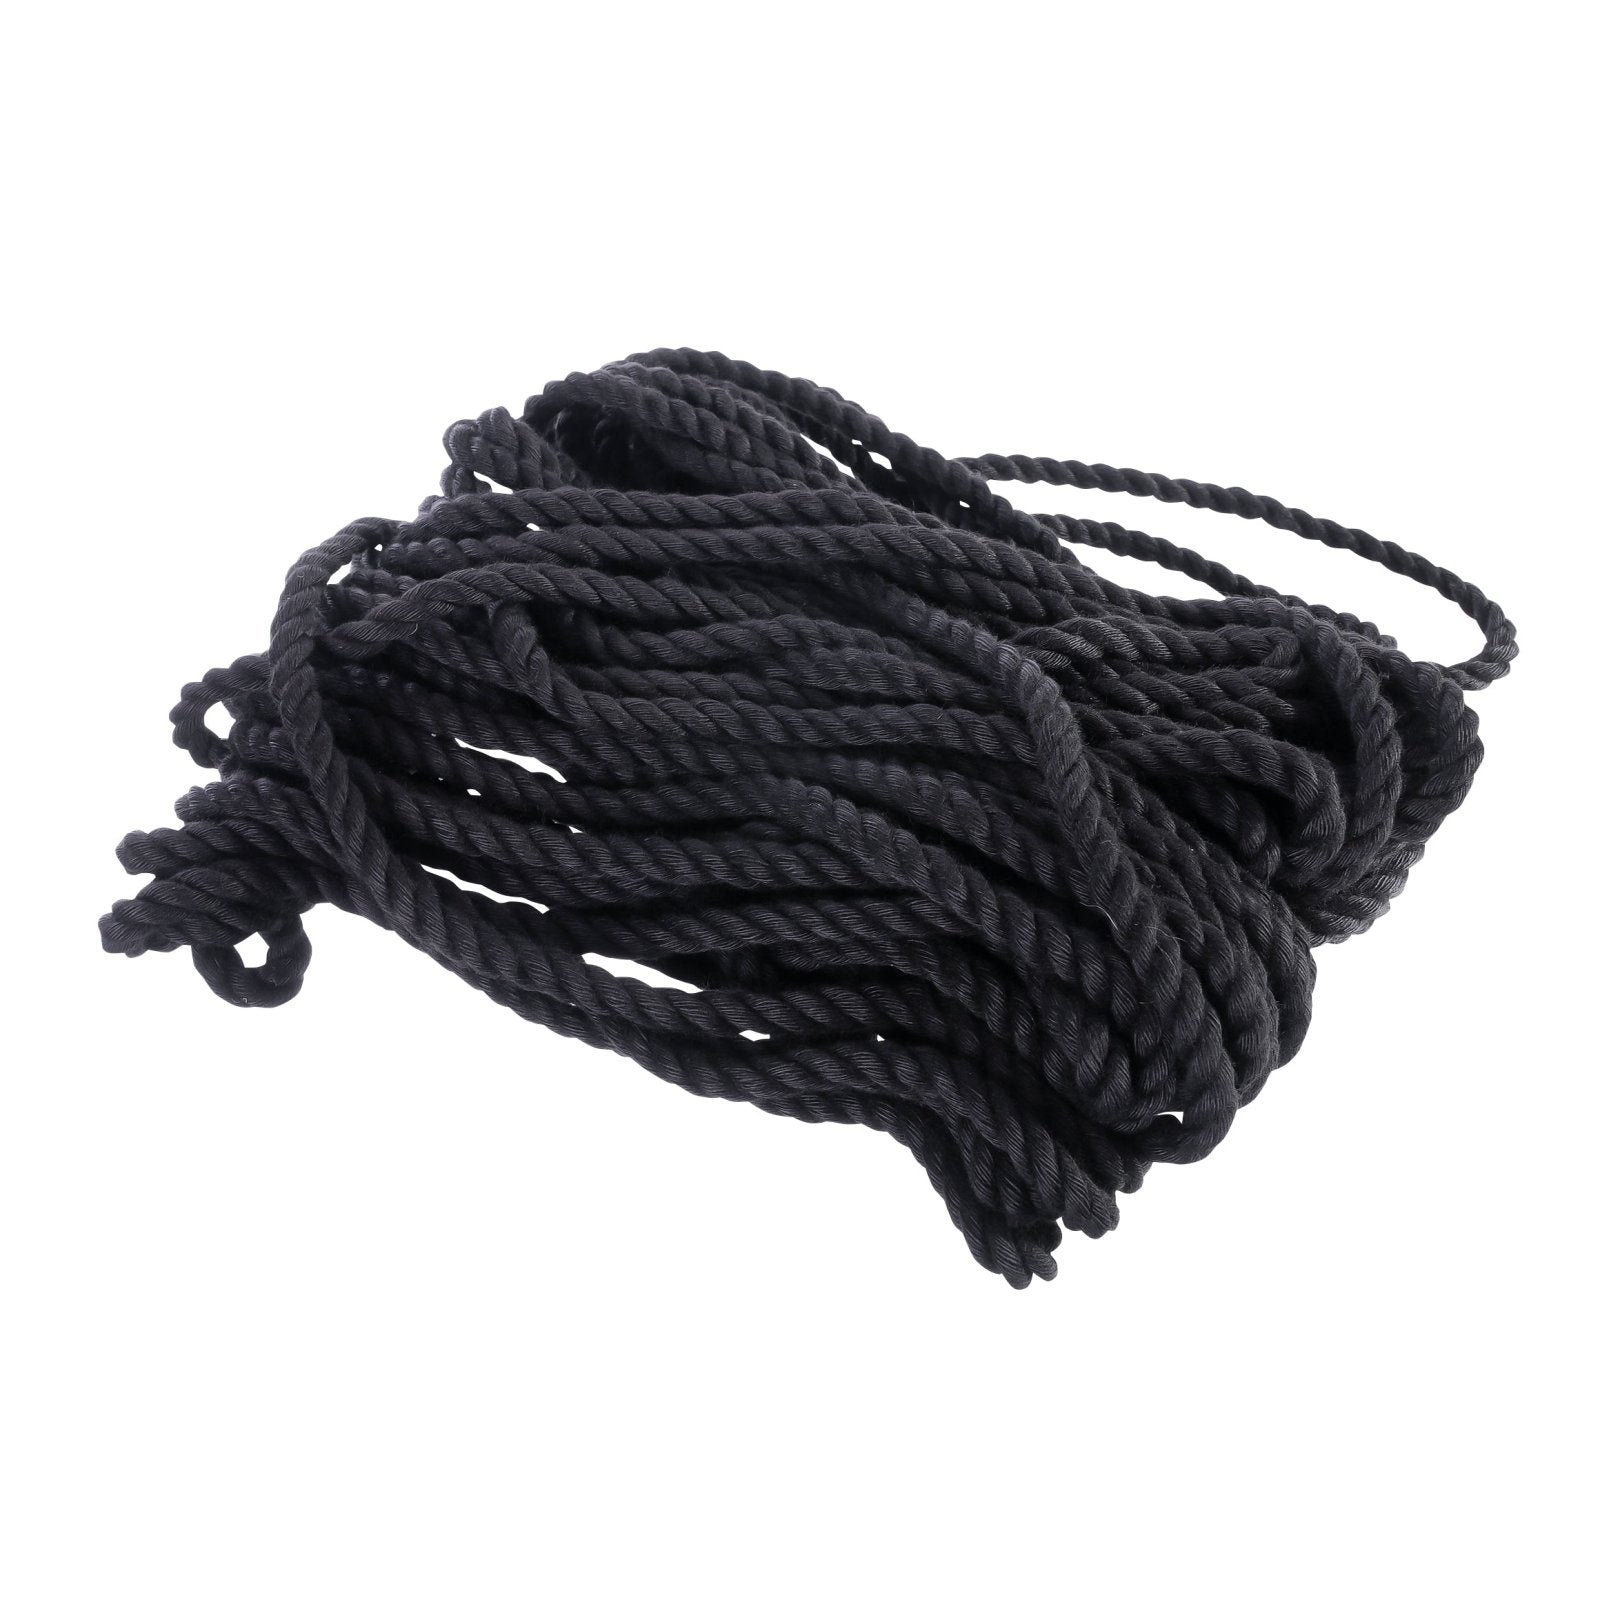 Core By Kink 50 feet 6mm Cotton Rope - Kink Store